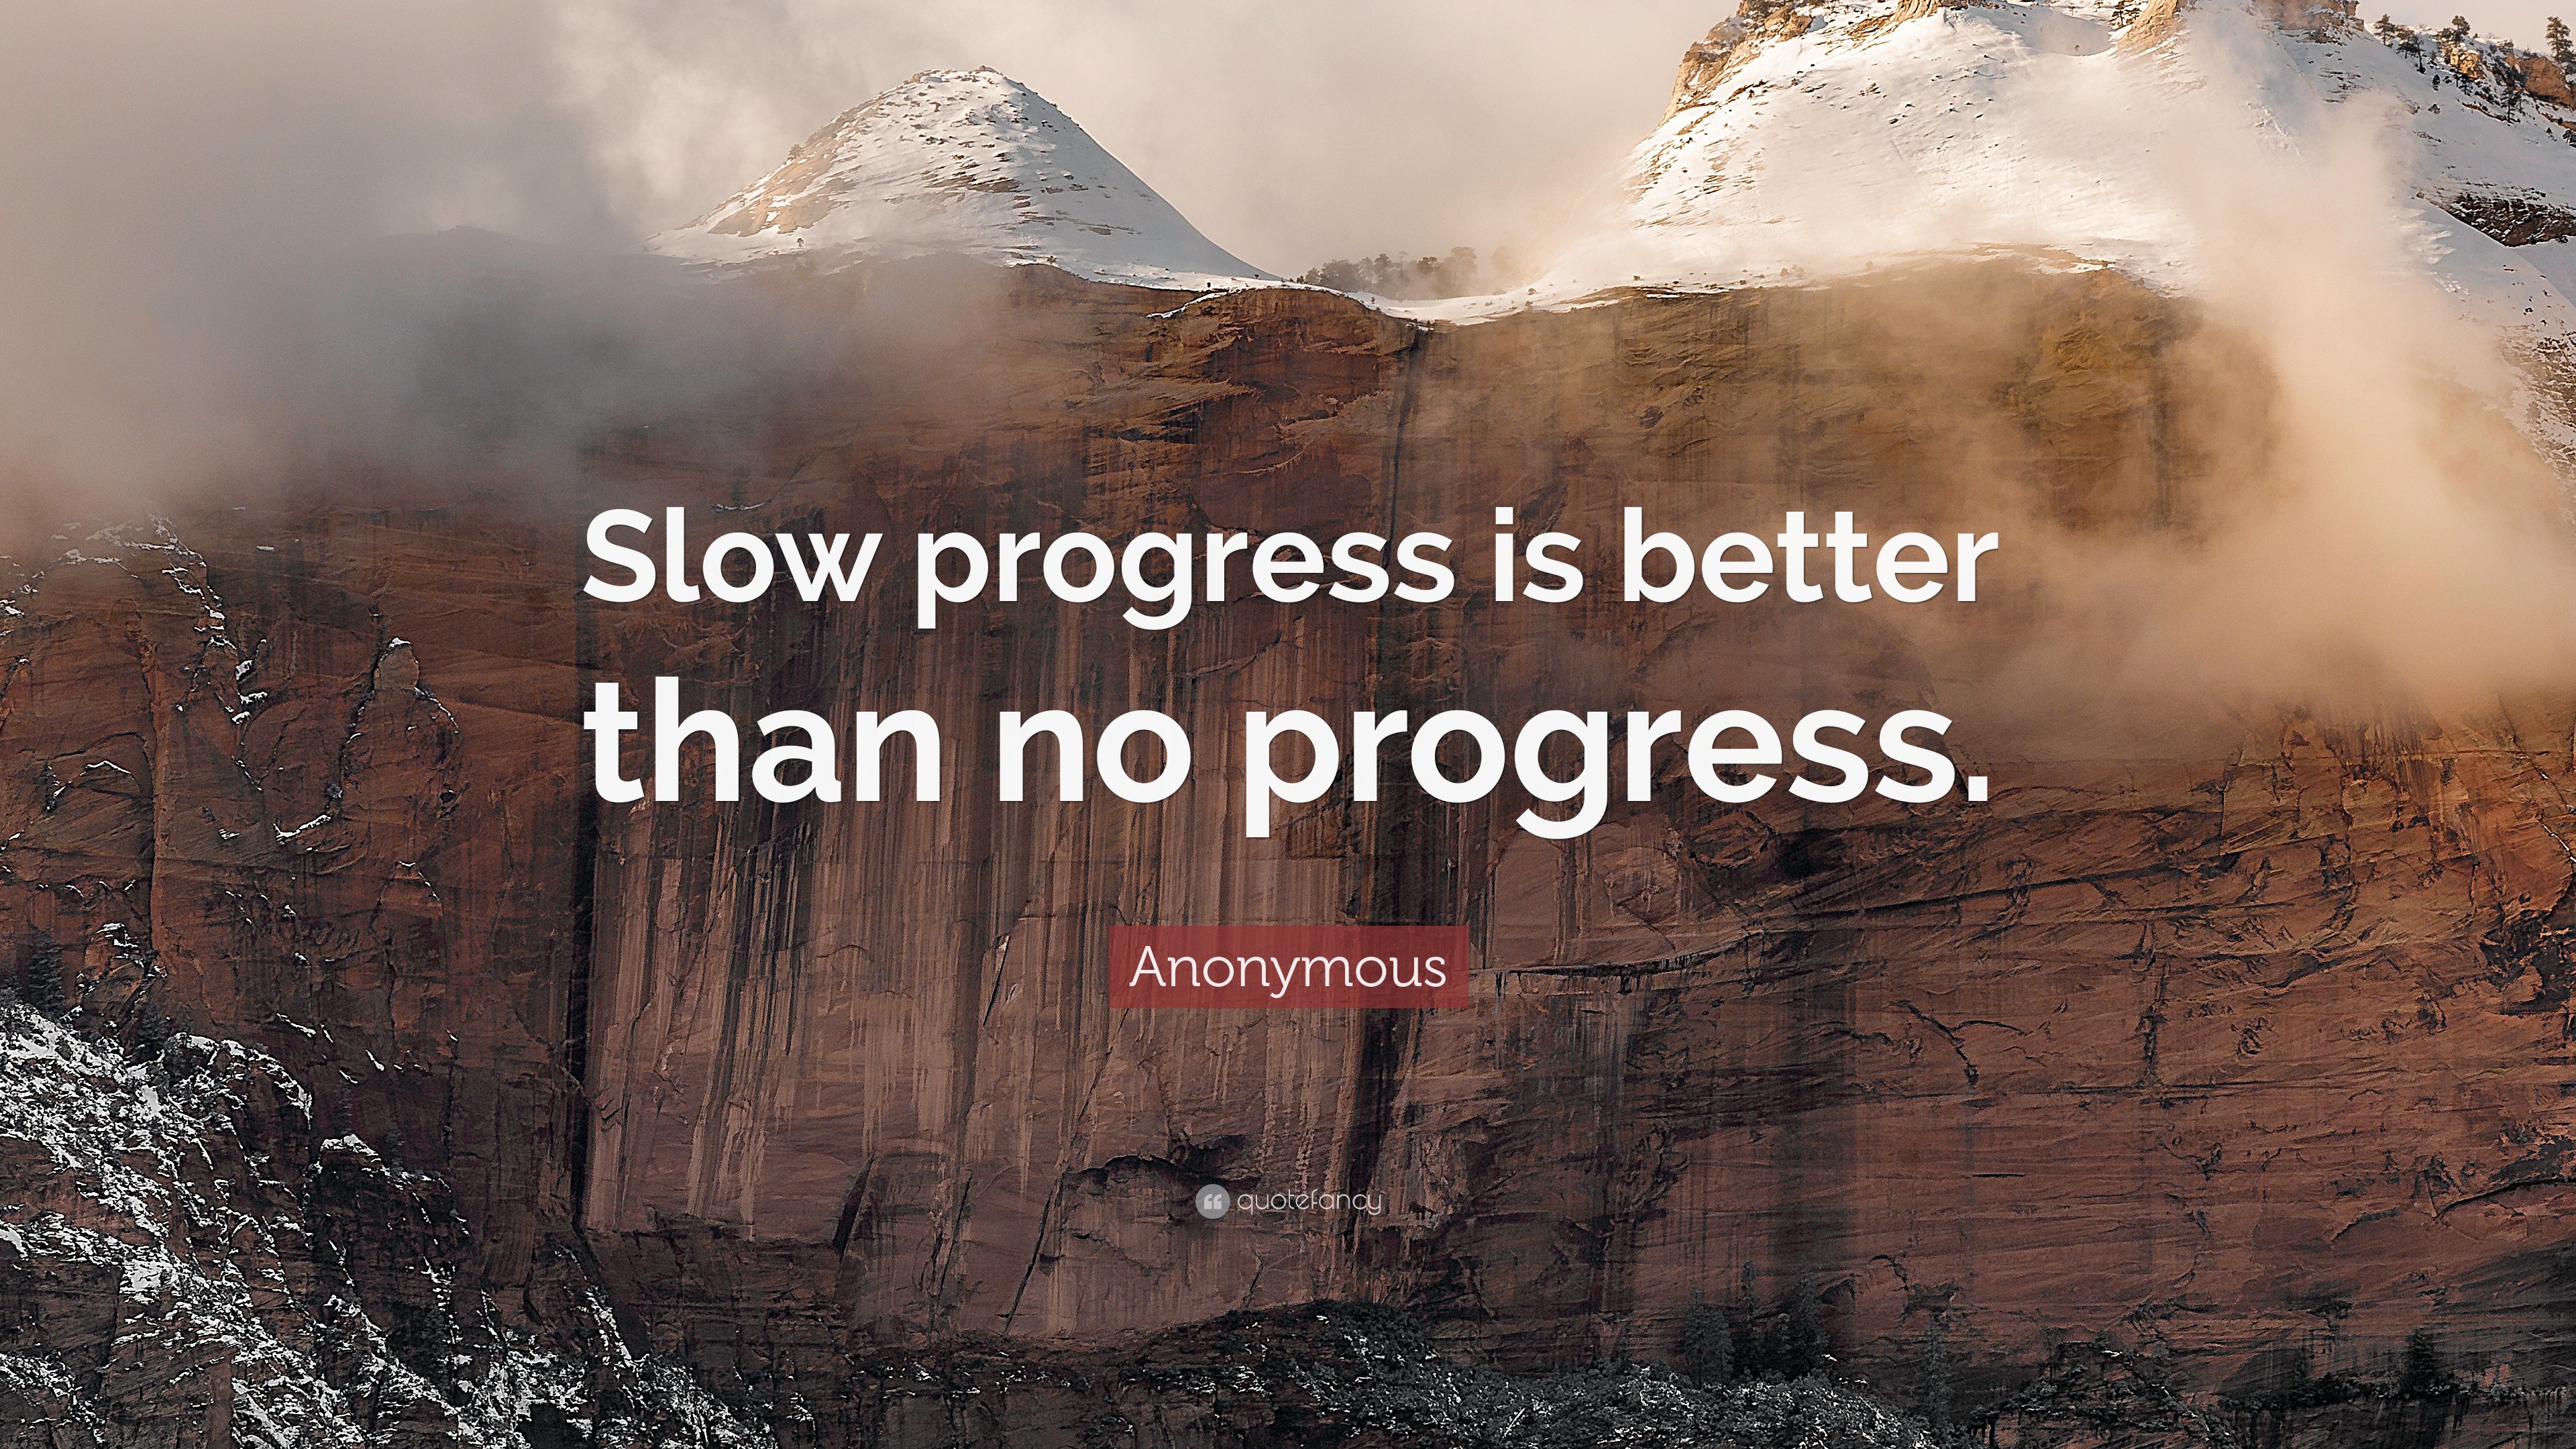 Anonymous Quote: “Slow progress is better than no progress.” (42